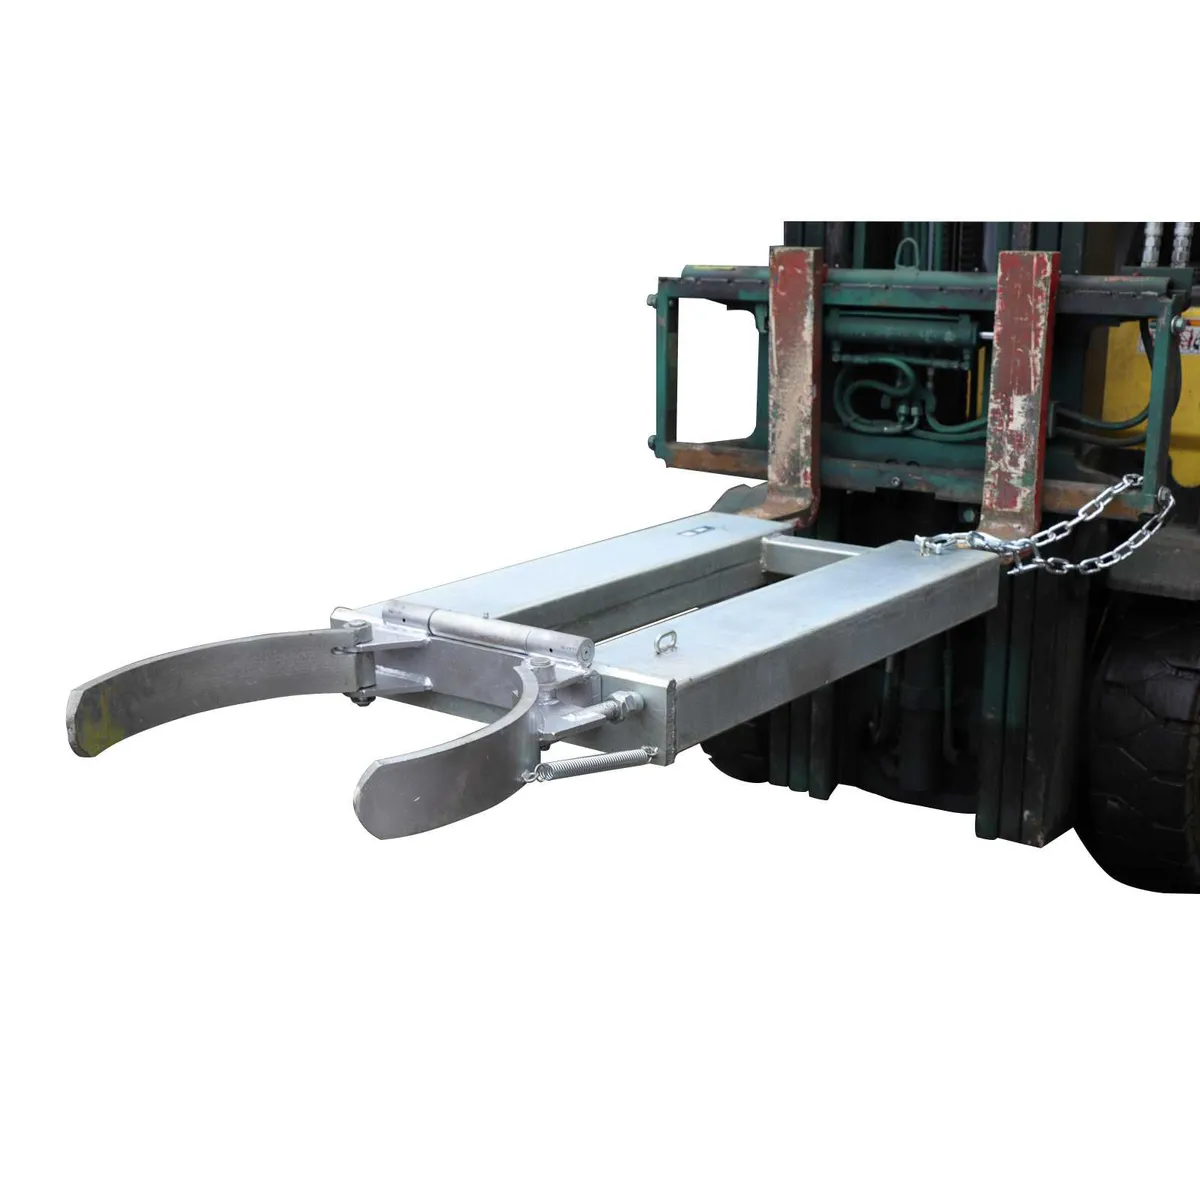 Drum grab lifter attachments - Image 1